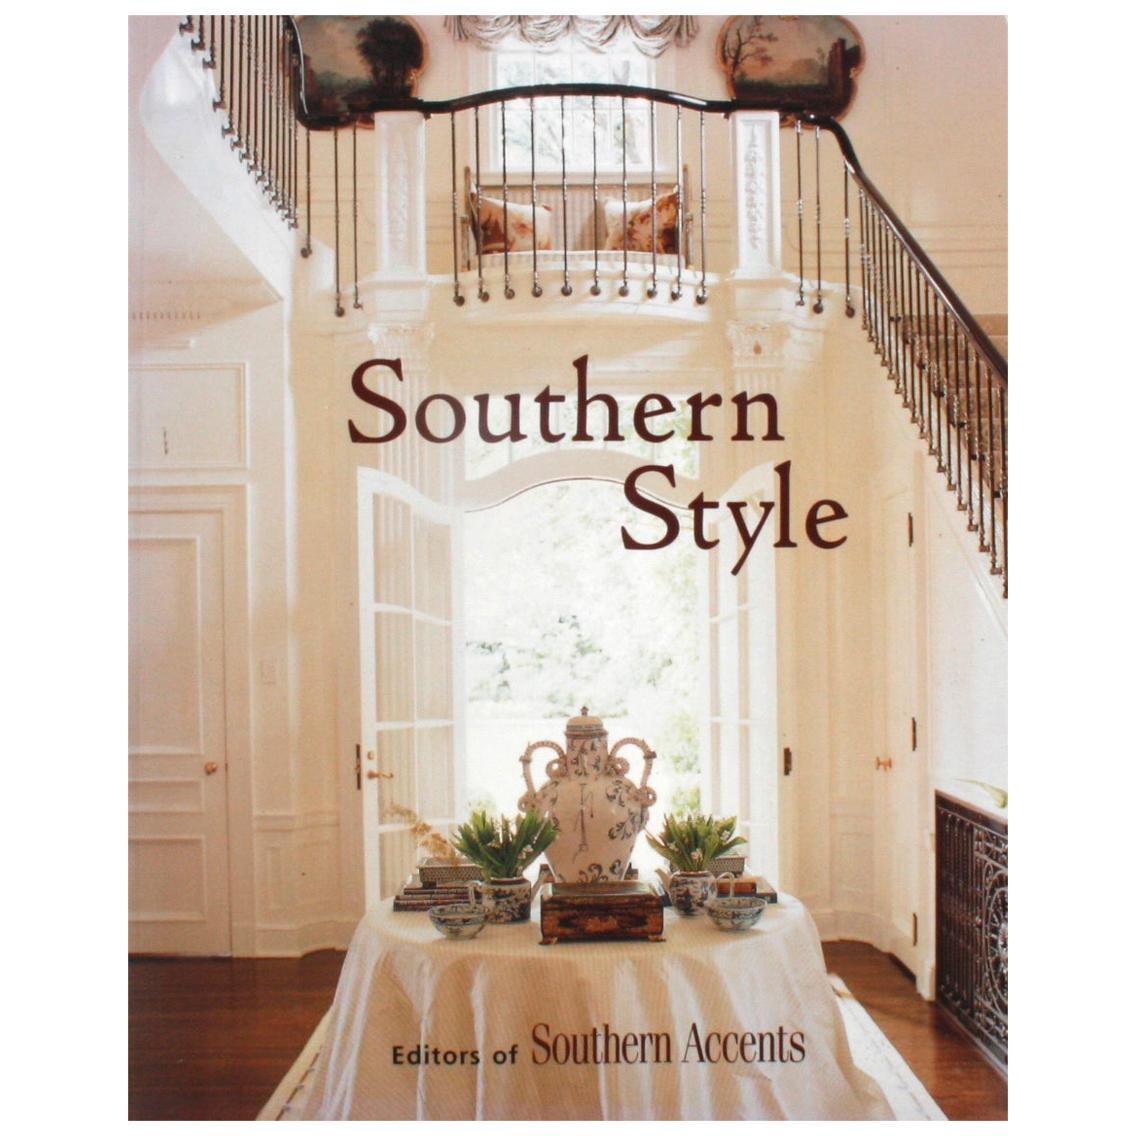 Southern Style by Mark Mayfield, First Edition